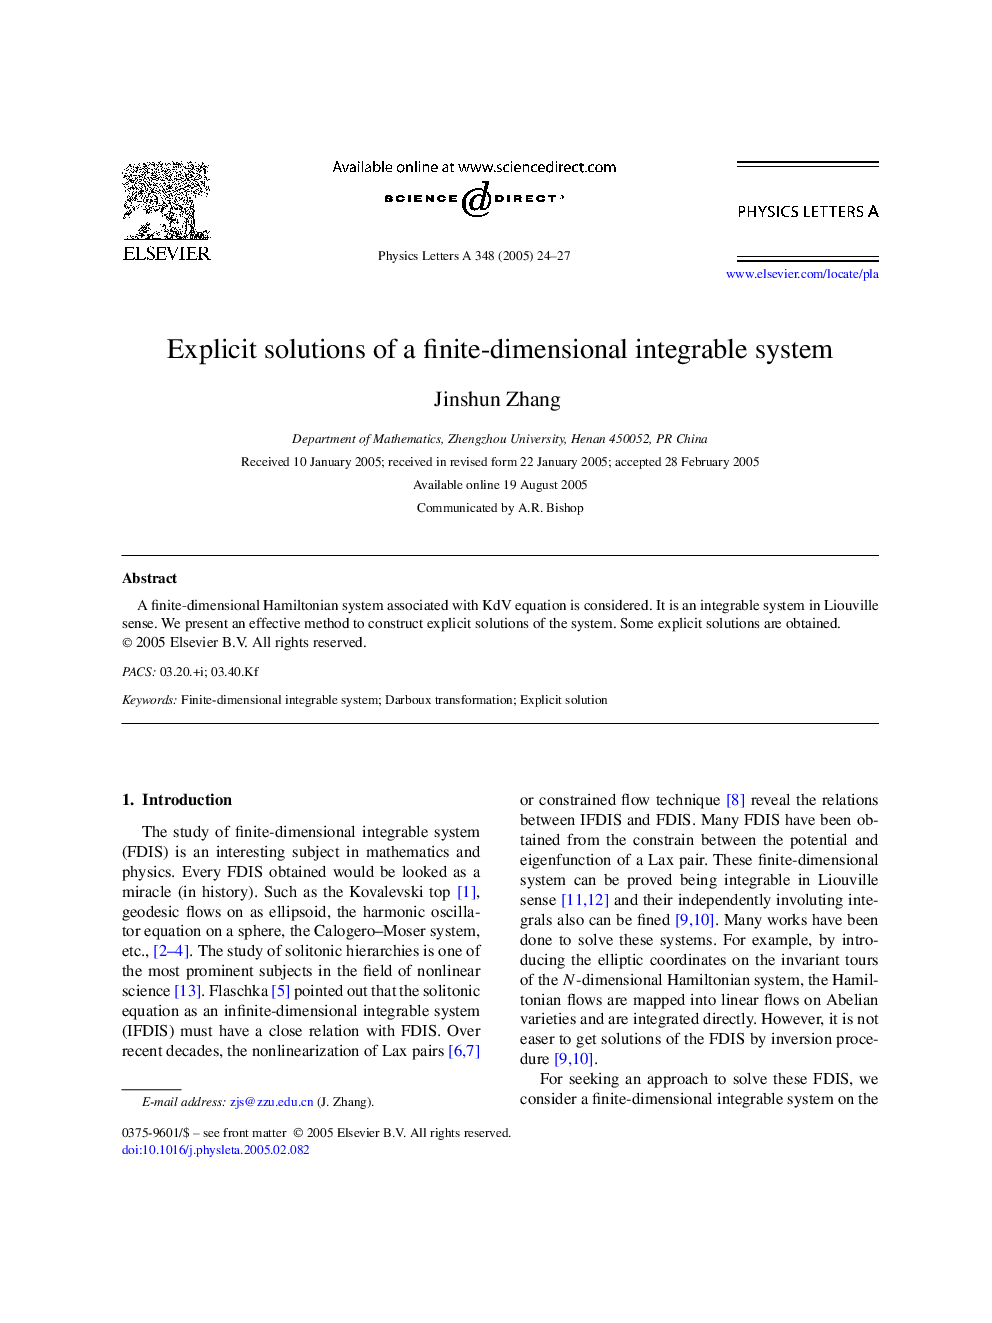 Explicit solutions of a finite-dimensional integrable system